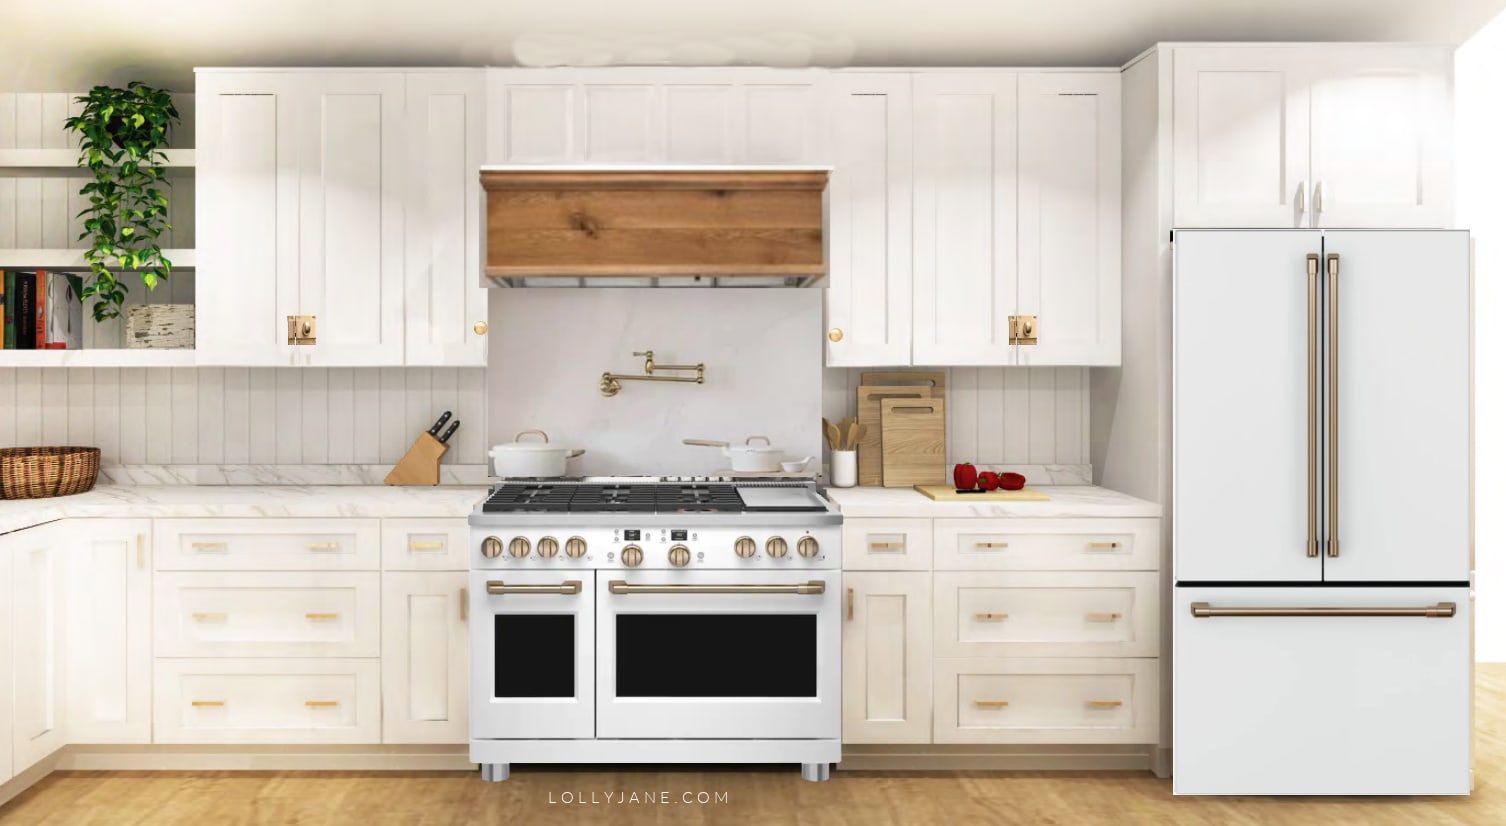 Are you wanting to renovate your kitchen on a budget? We've found the best RTA cabinets for kitchen renovations that will save you thousands! Lots of kitchen remodel inspiration for renovating in 2022!